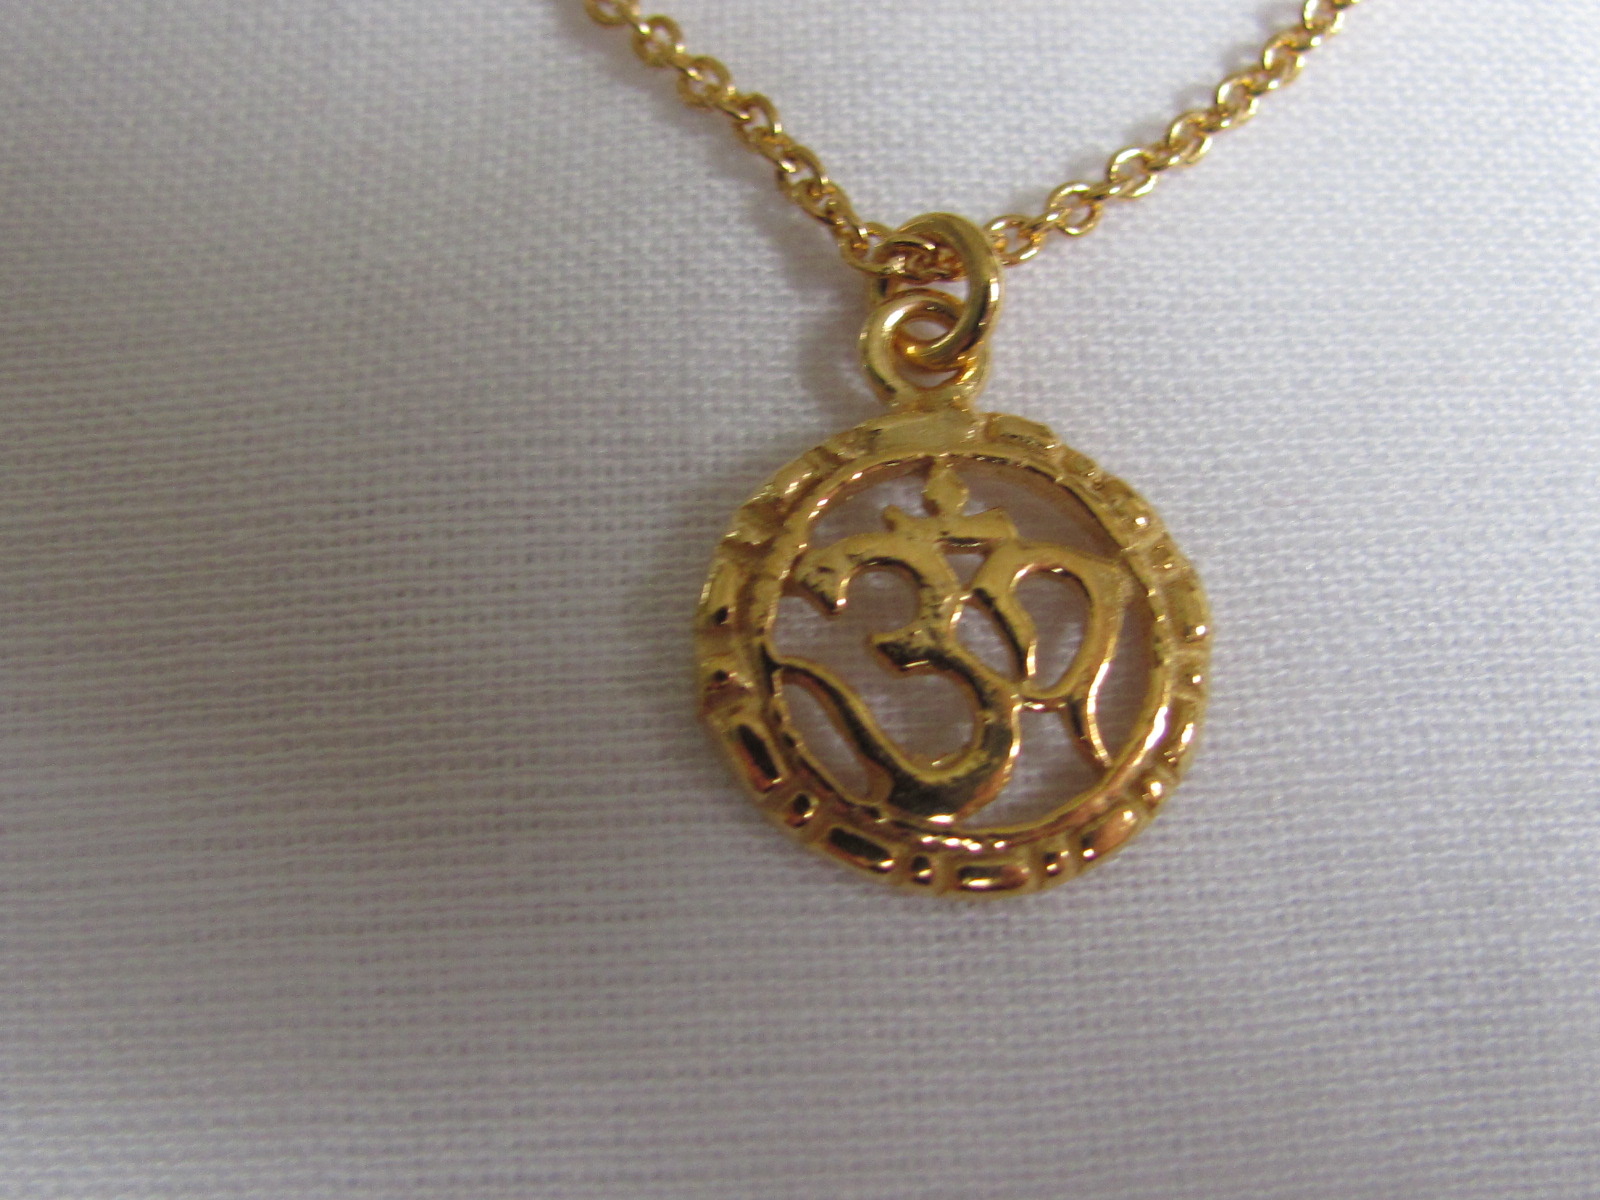 Necklace gold on silver with OHM pendant charm